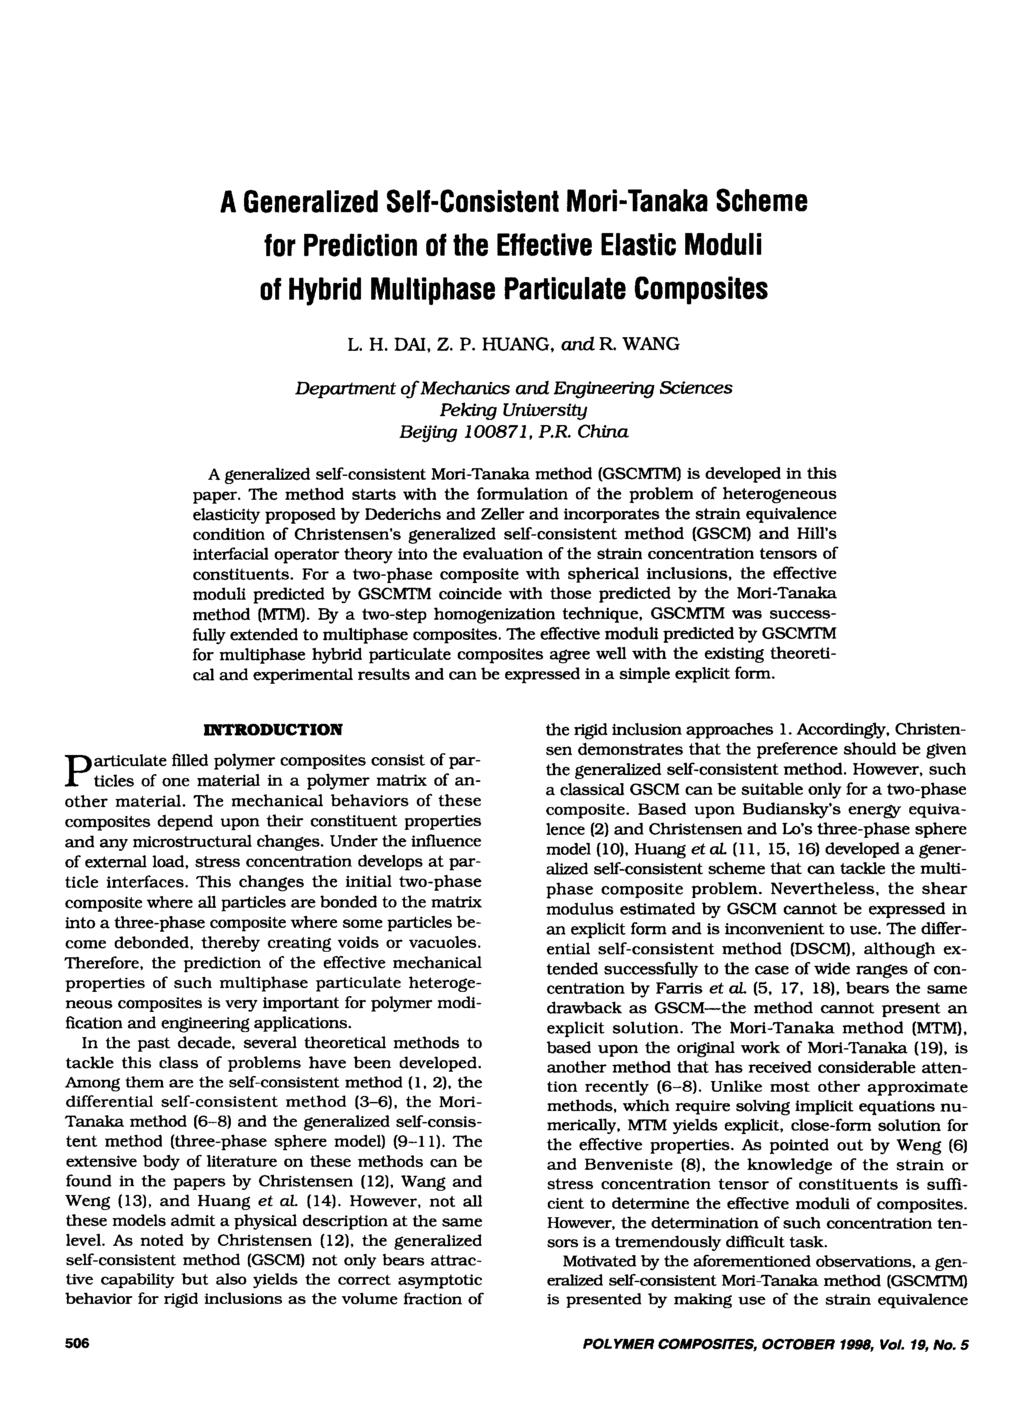 A Gene ra I i ze d Se If - C o n s i s t e n t M or i -Ta na ka Sc h e m e for Prediction of the Effective Elastic Moduli of Hybrid Multiphase Particulate Composites L. H. DAI, 2. P. HUANG, andr.